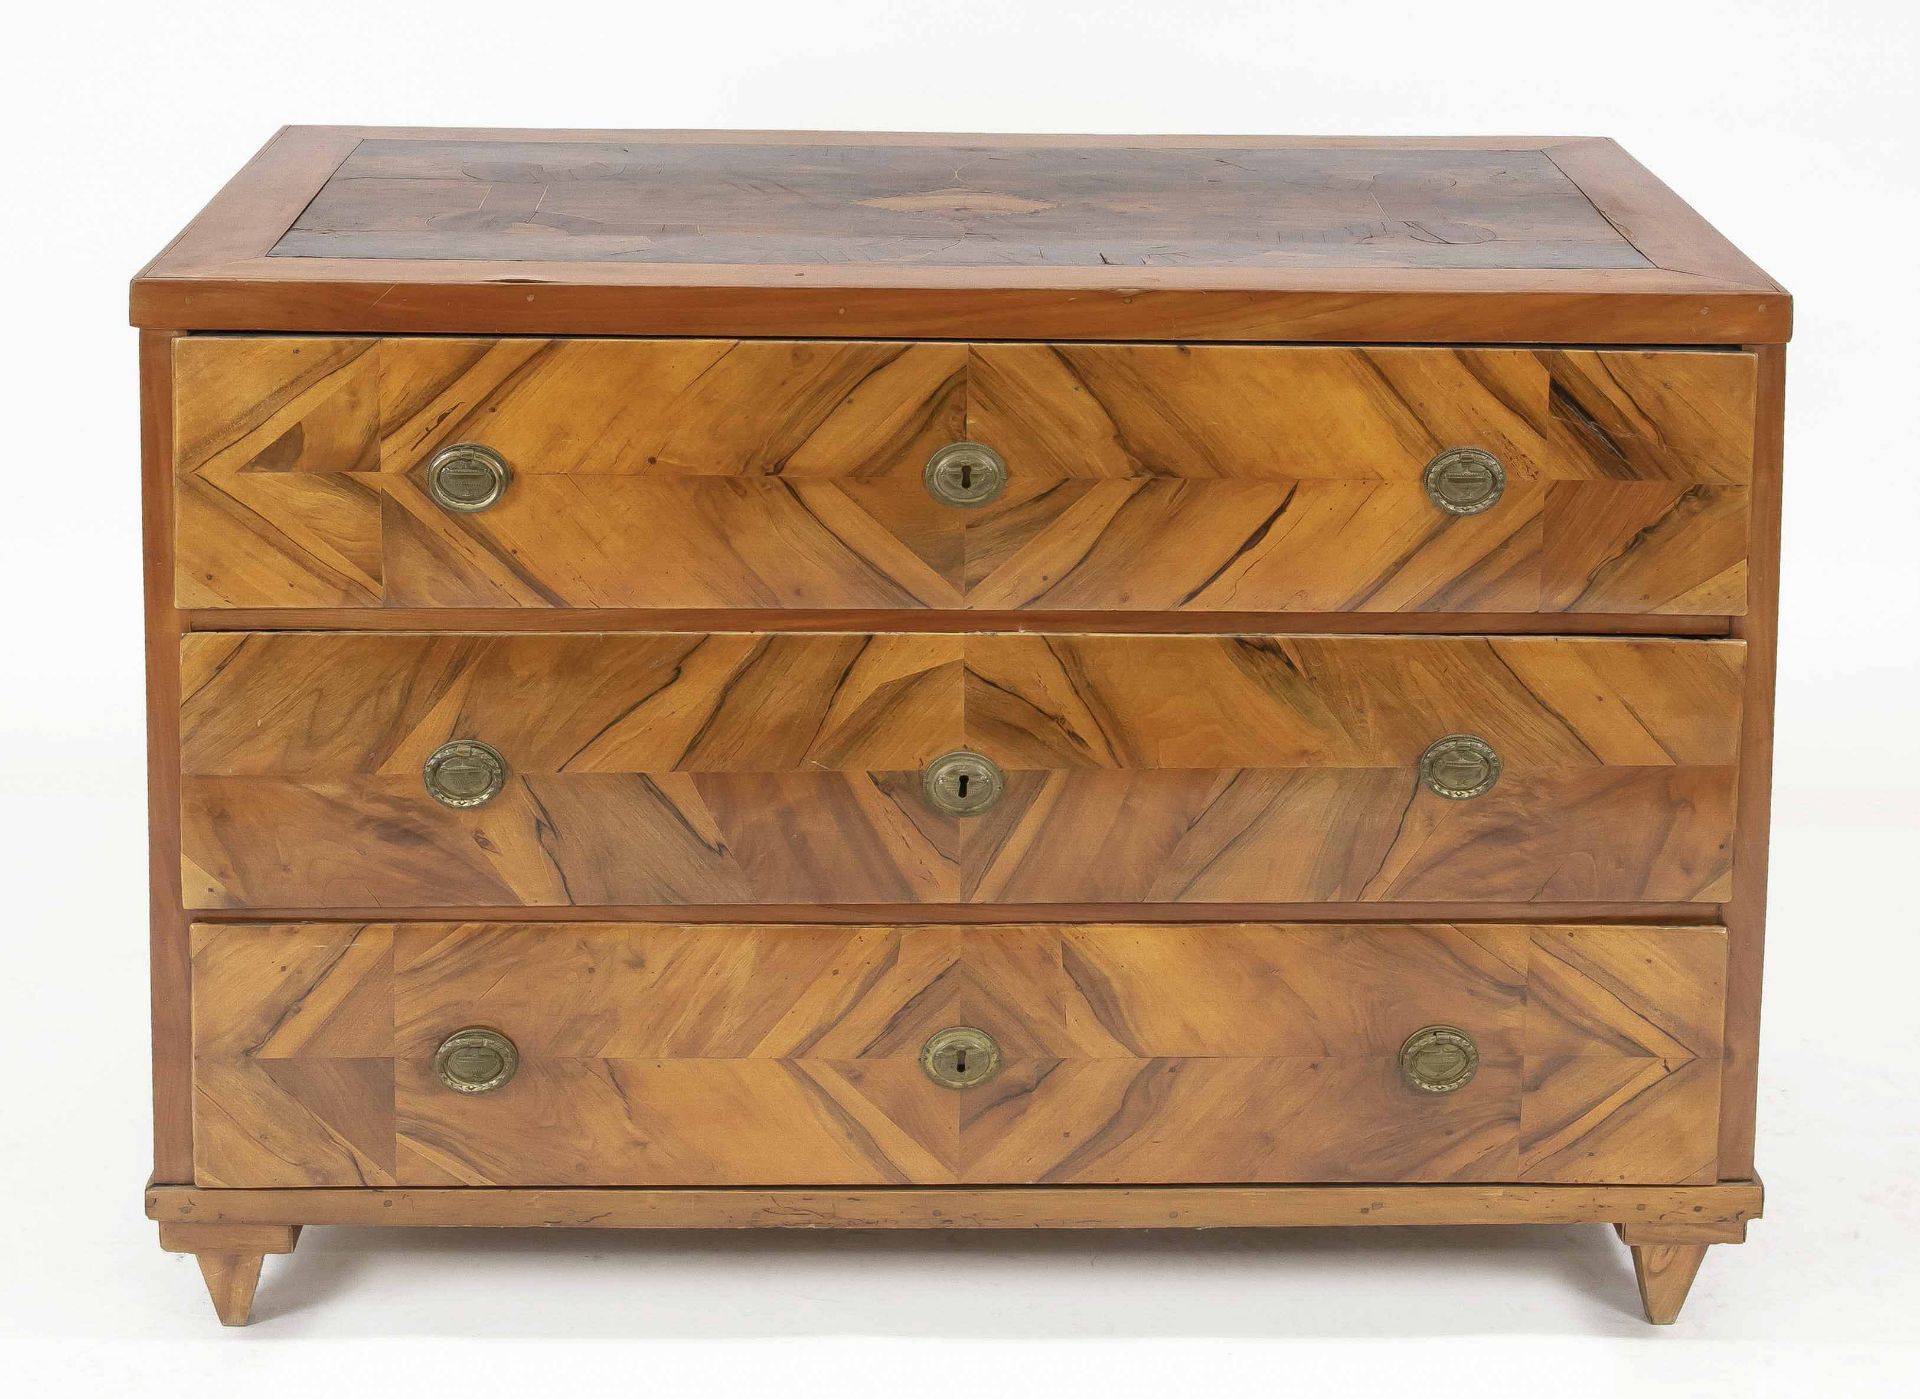 Empire chest of drawers from around 1800, walnut veneer, top inlaid with various precious woods,